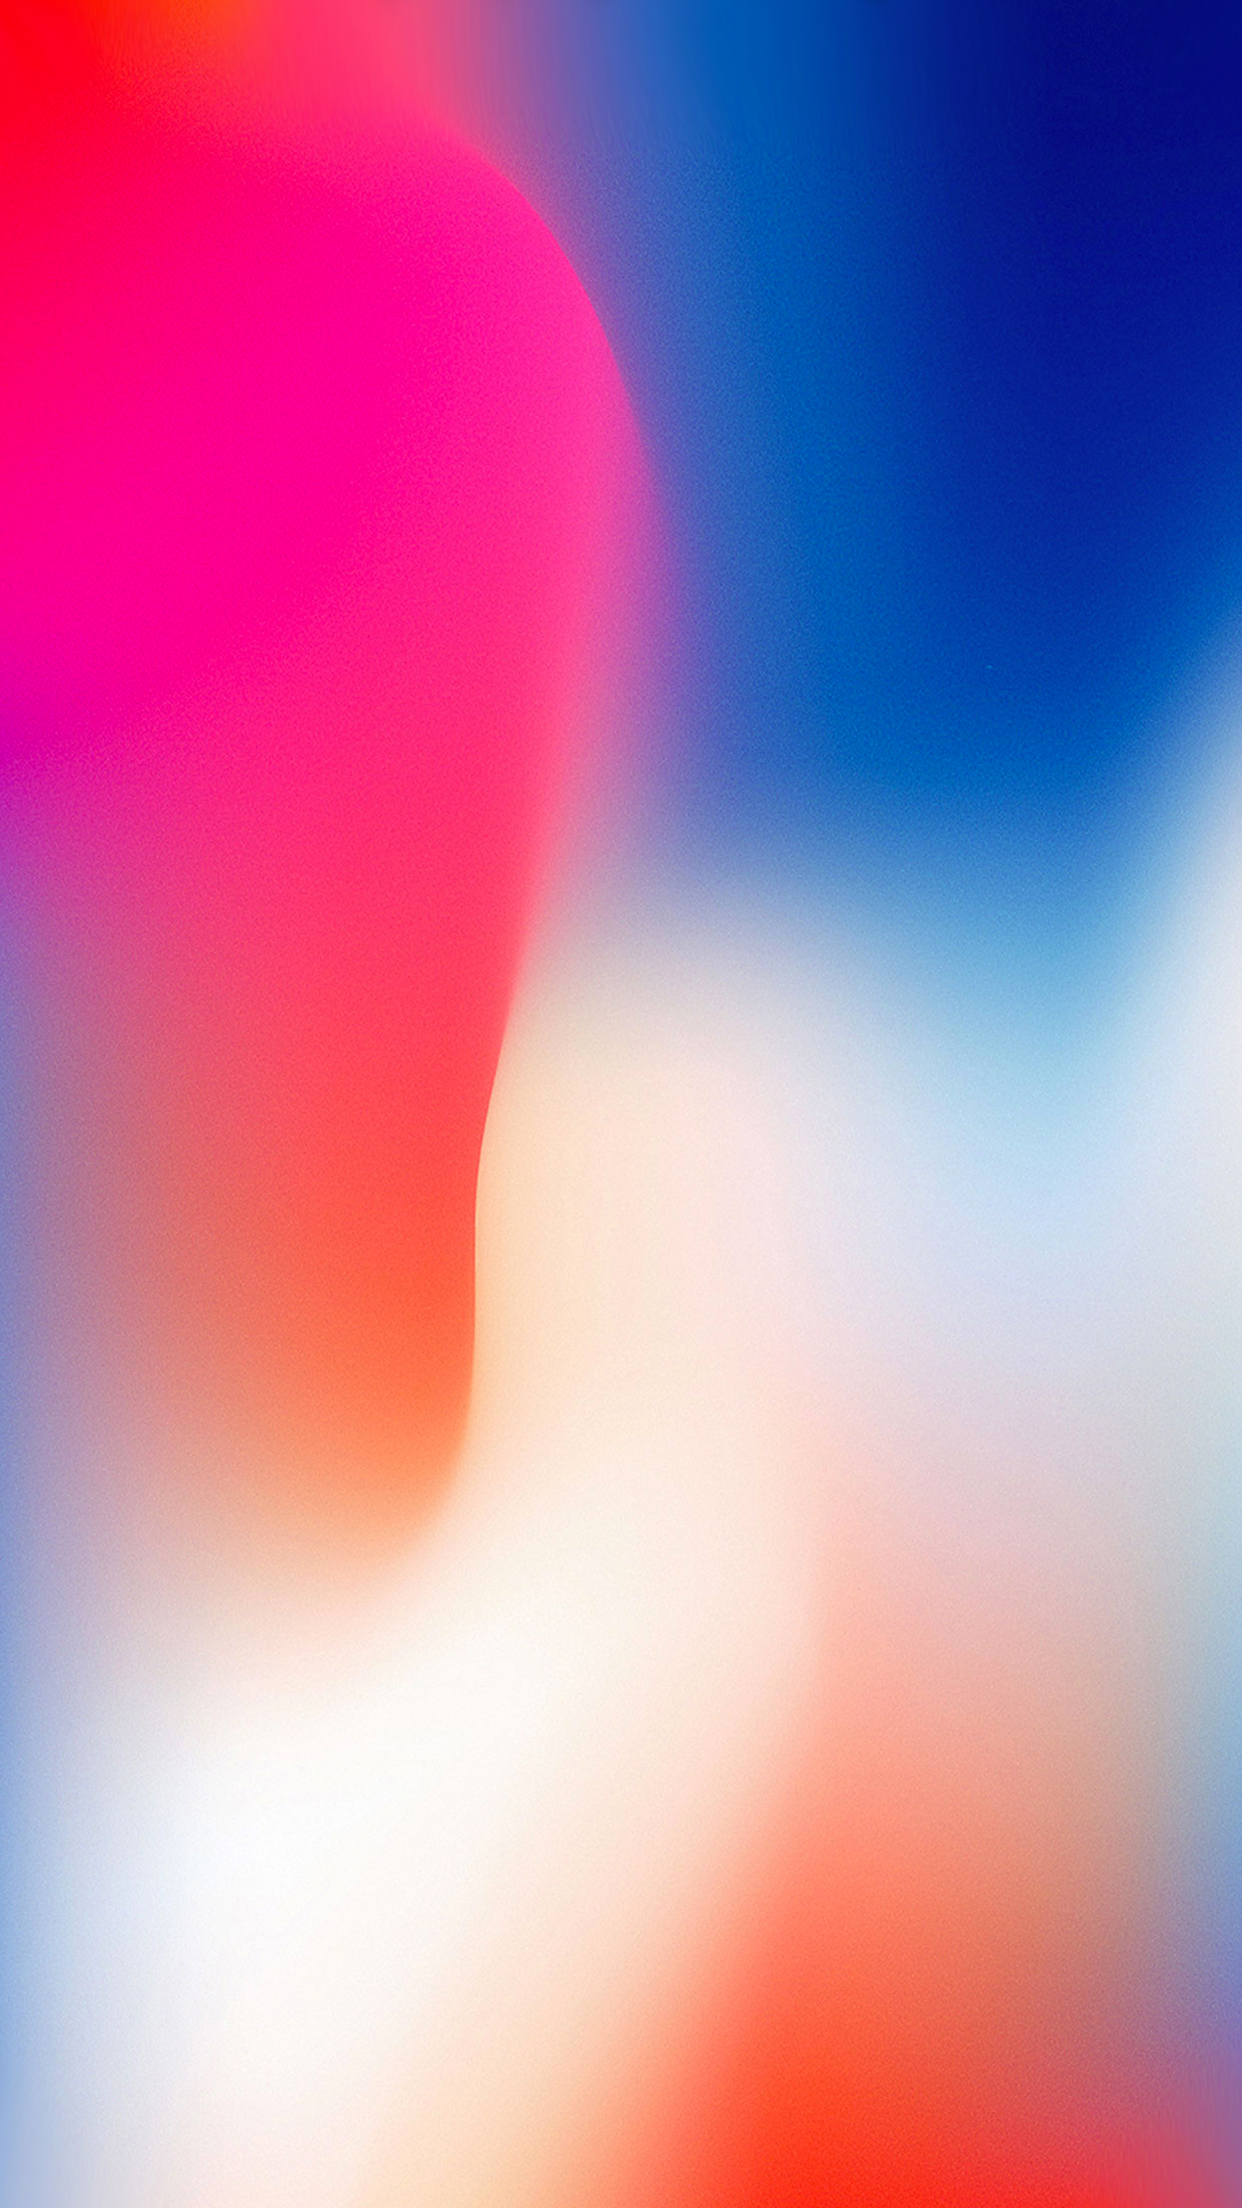 iPhone Wallpapers in High Quality